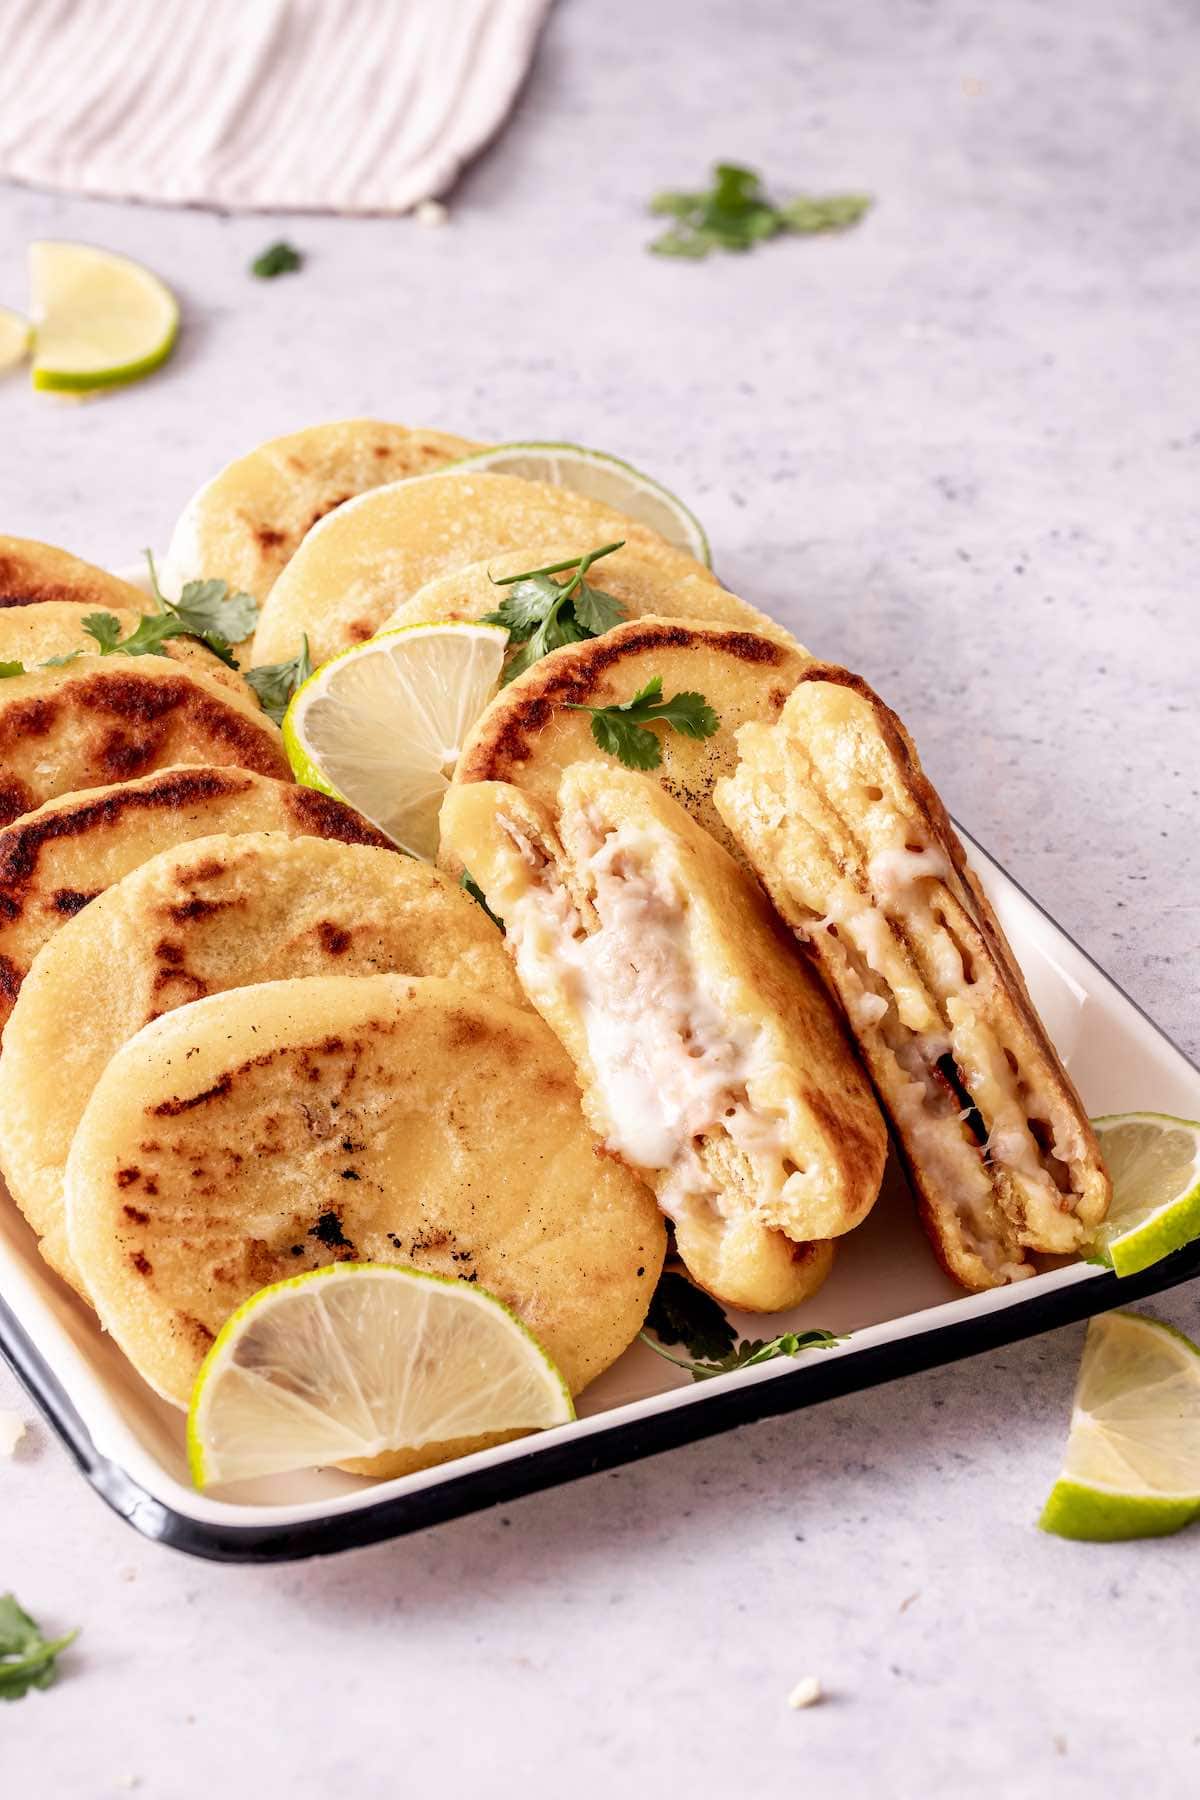 pupusas stuffed with beans and cheese in a white tray.